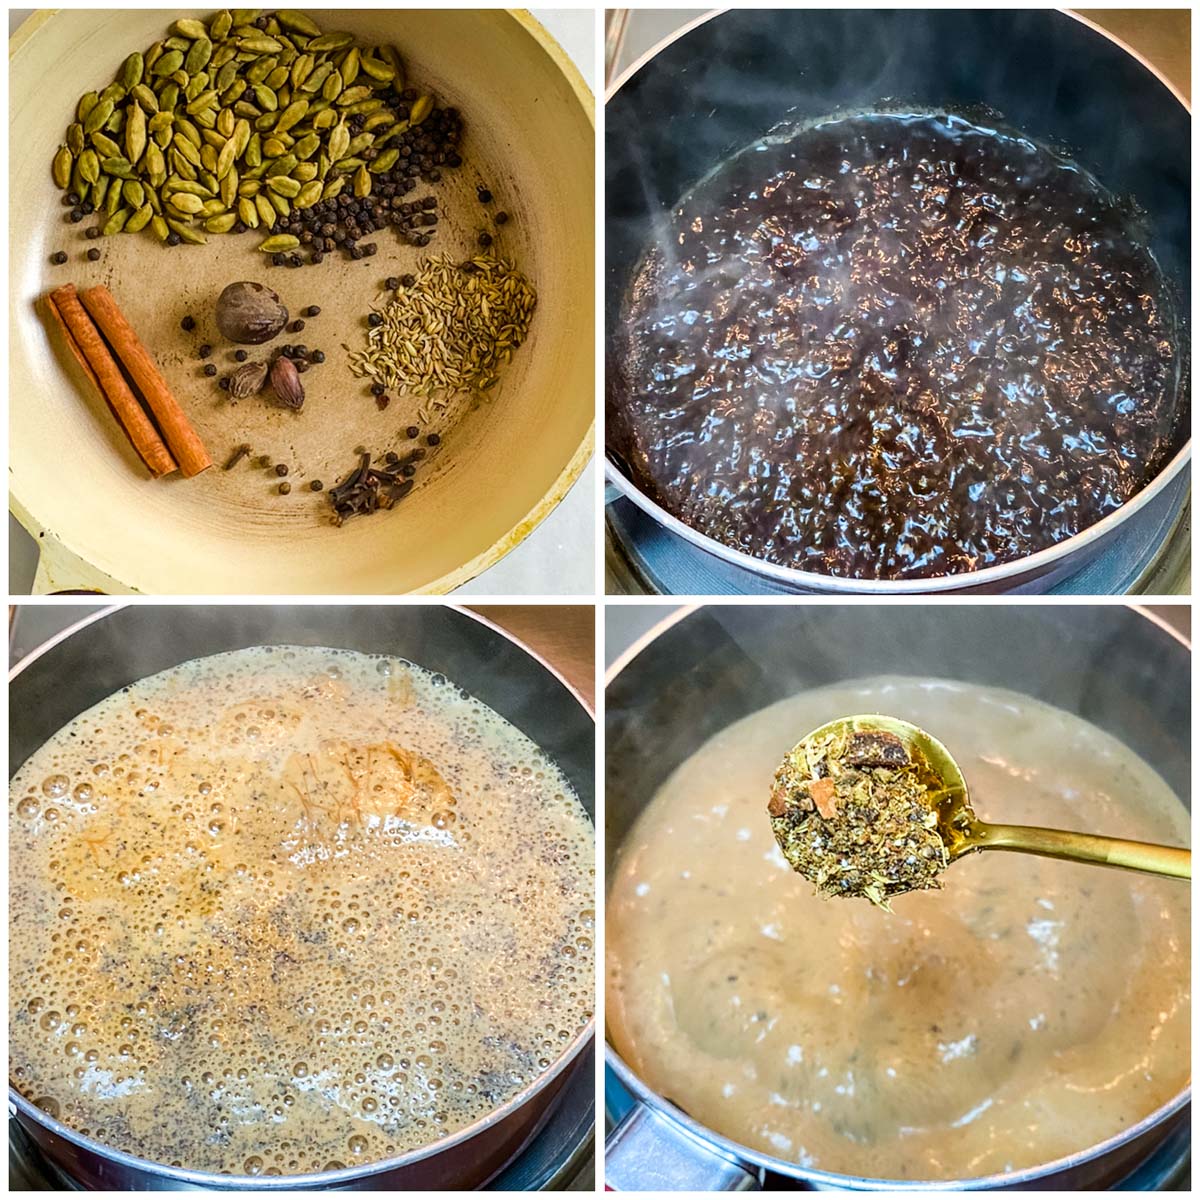 Step-by-step photos making chai masala in a pot.